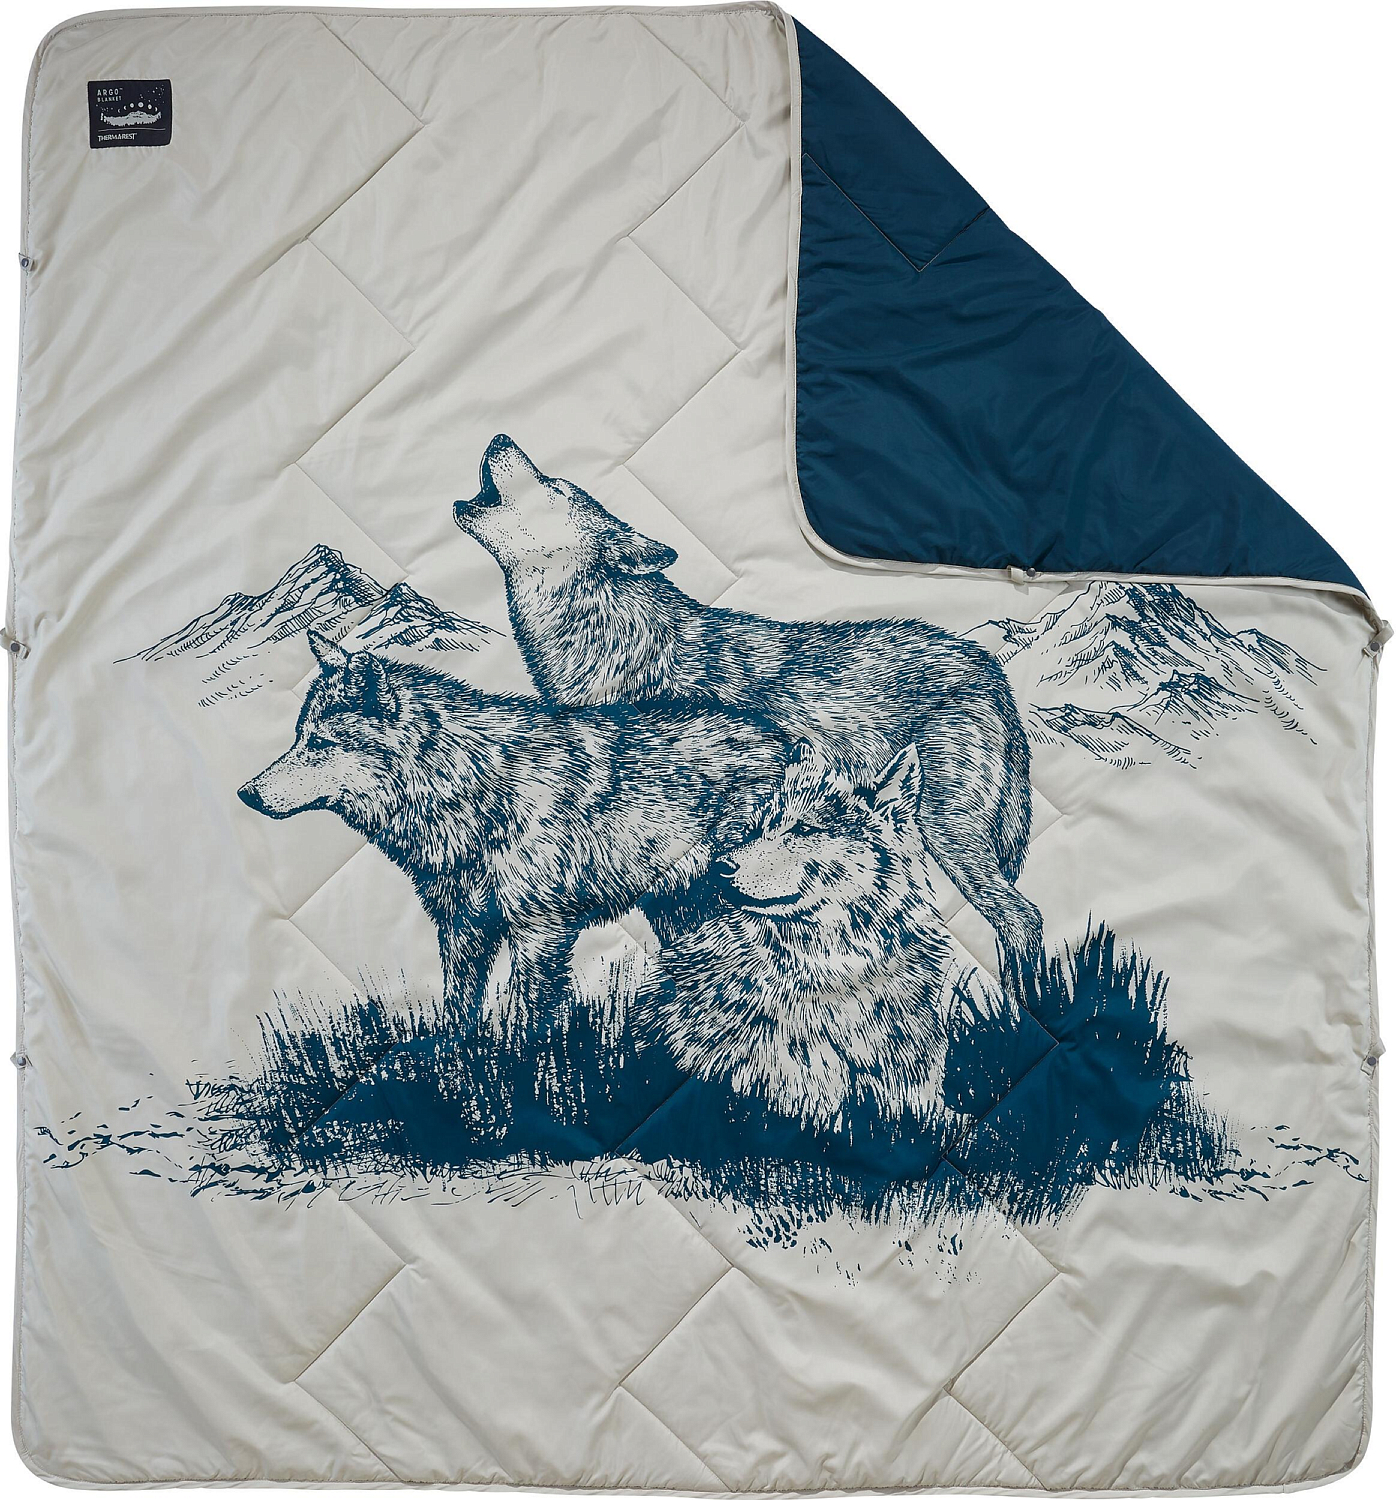 Одеяло THERM-A-REST Argo Blanket Wolf Print